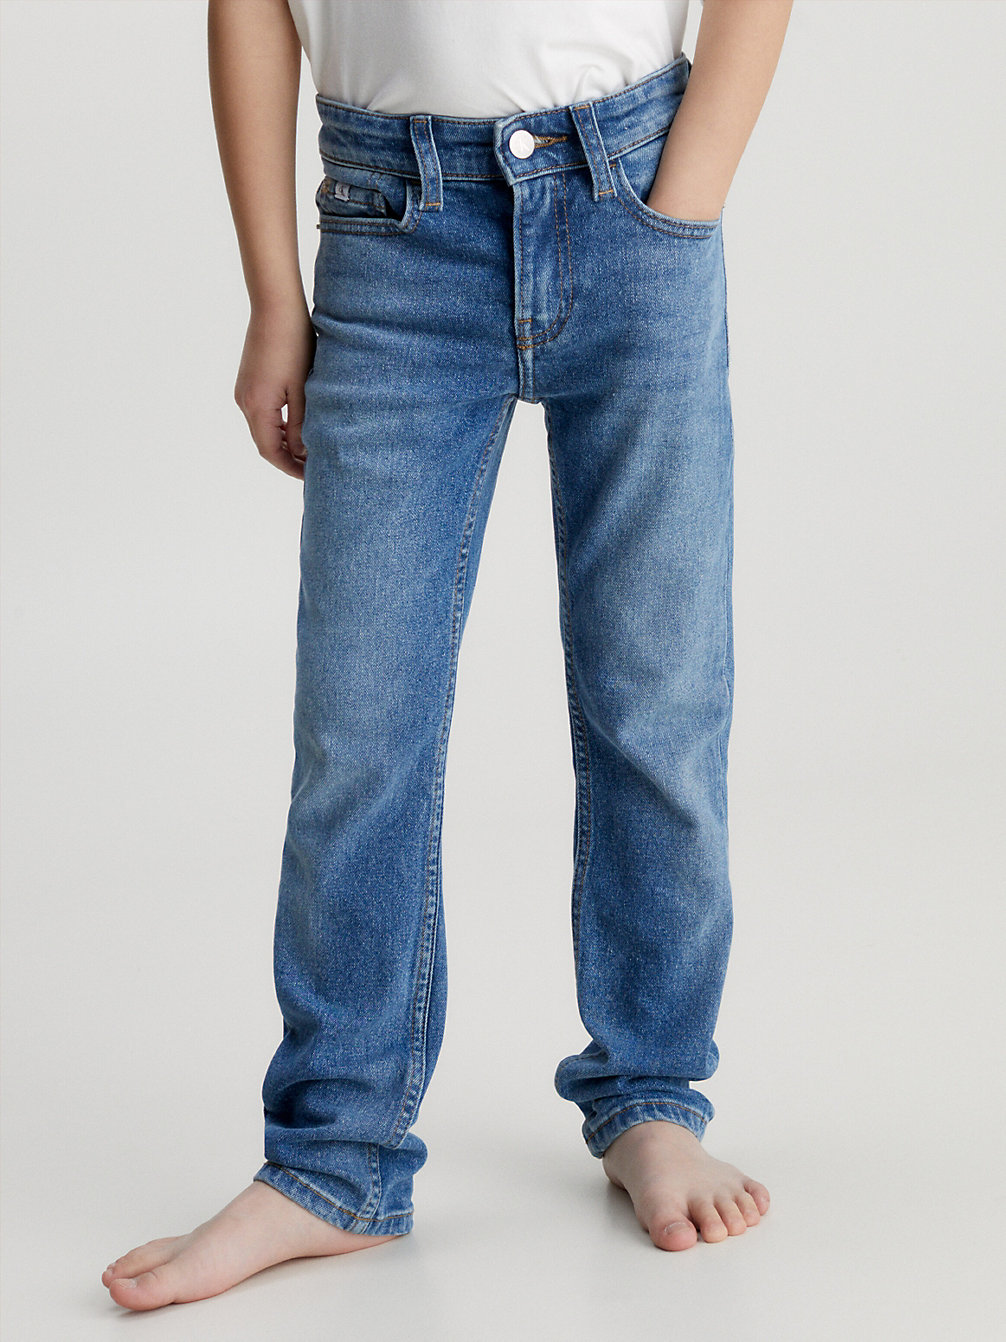 MID BLUE Mid Rise Slim Jeans undefined boys Calvin Klein